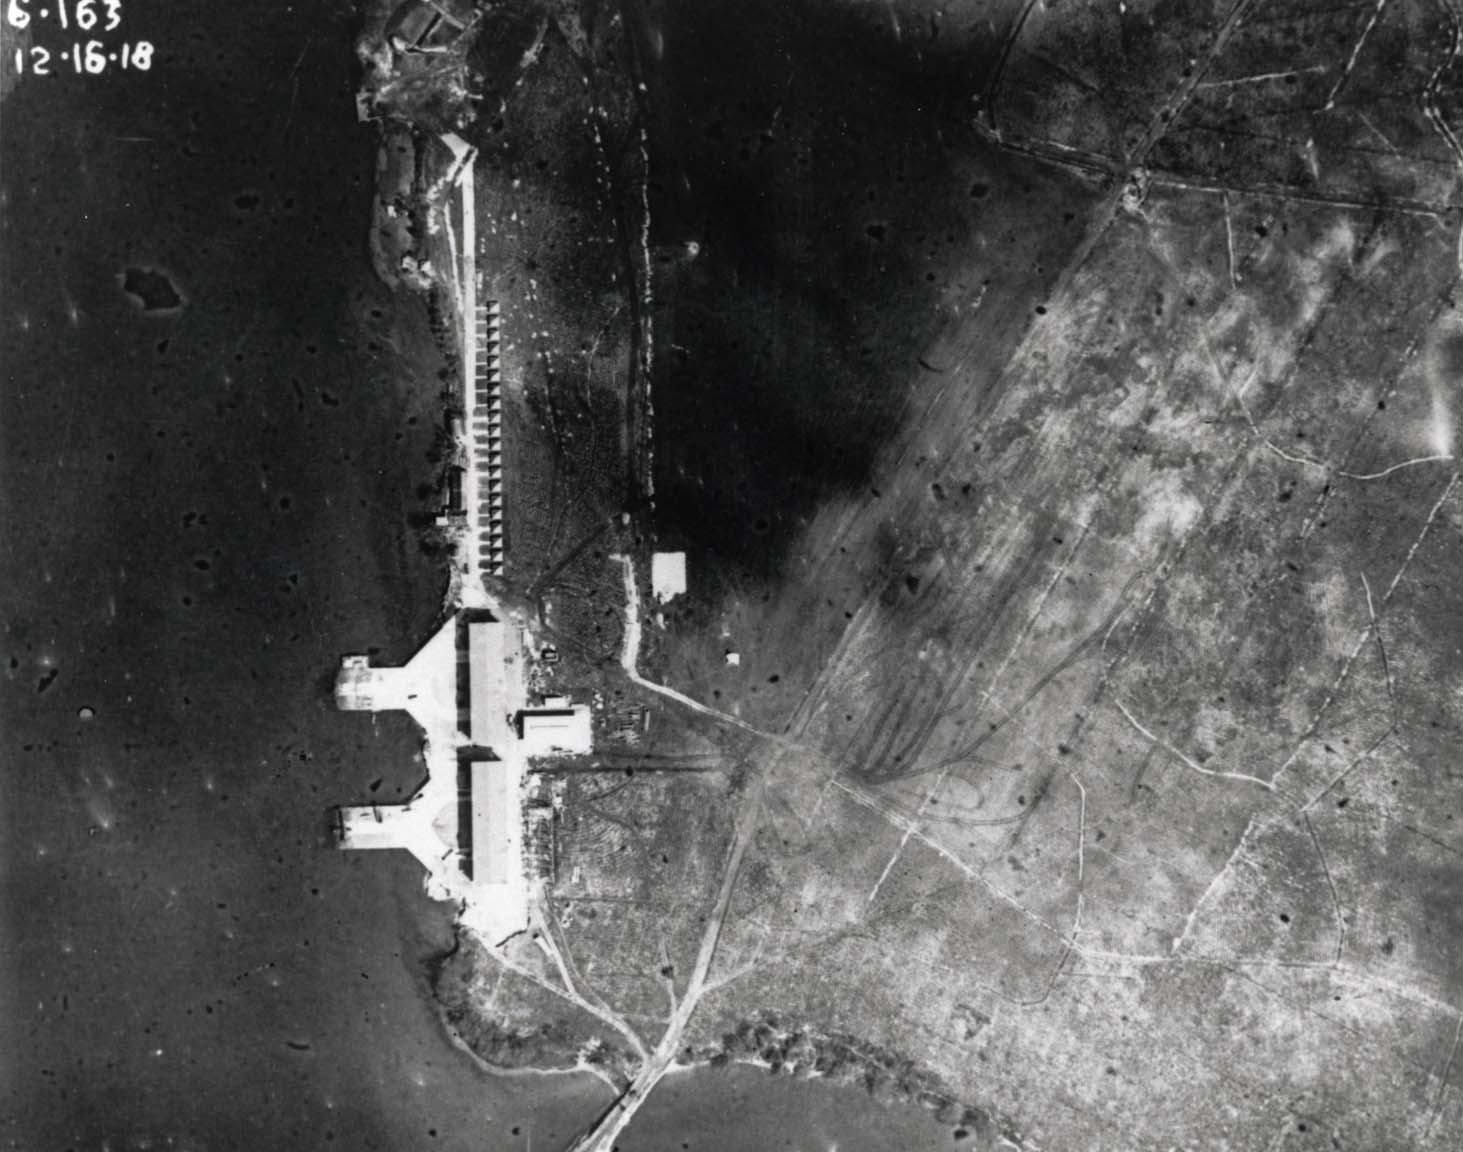 Aerial photo looking straight down on the seaplane hangars and ramps at Luke Field on Ford Island in Pearl Harbor, Hawaii, Dec 26, 1918.